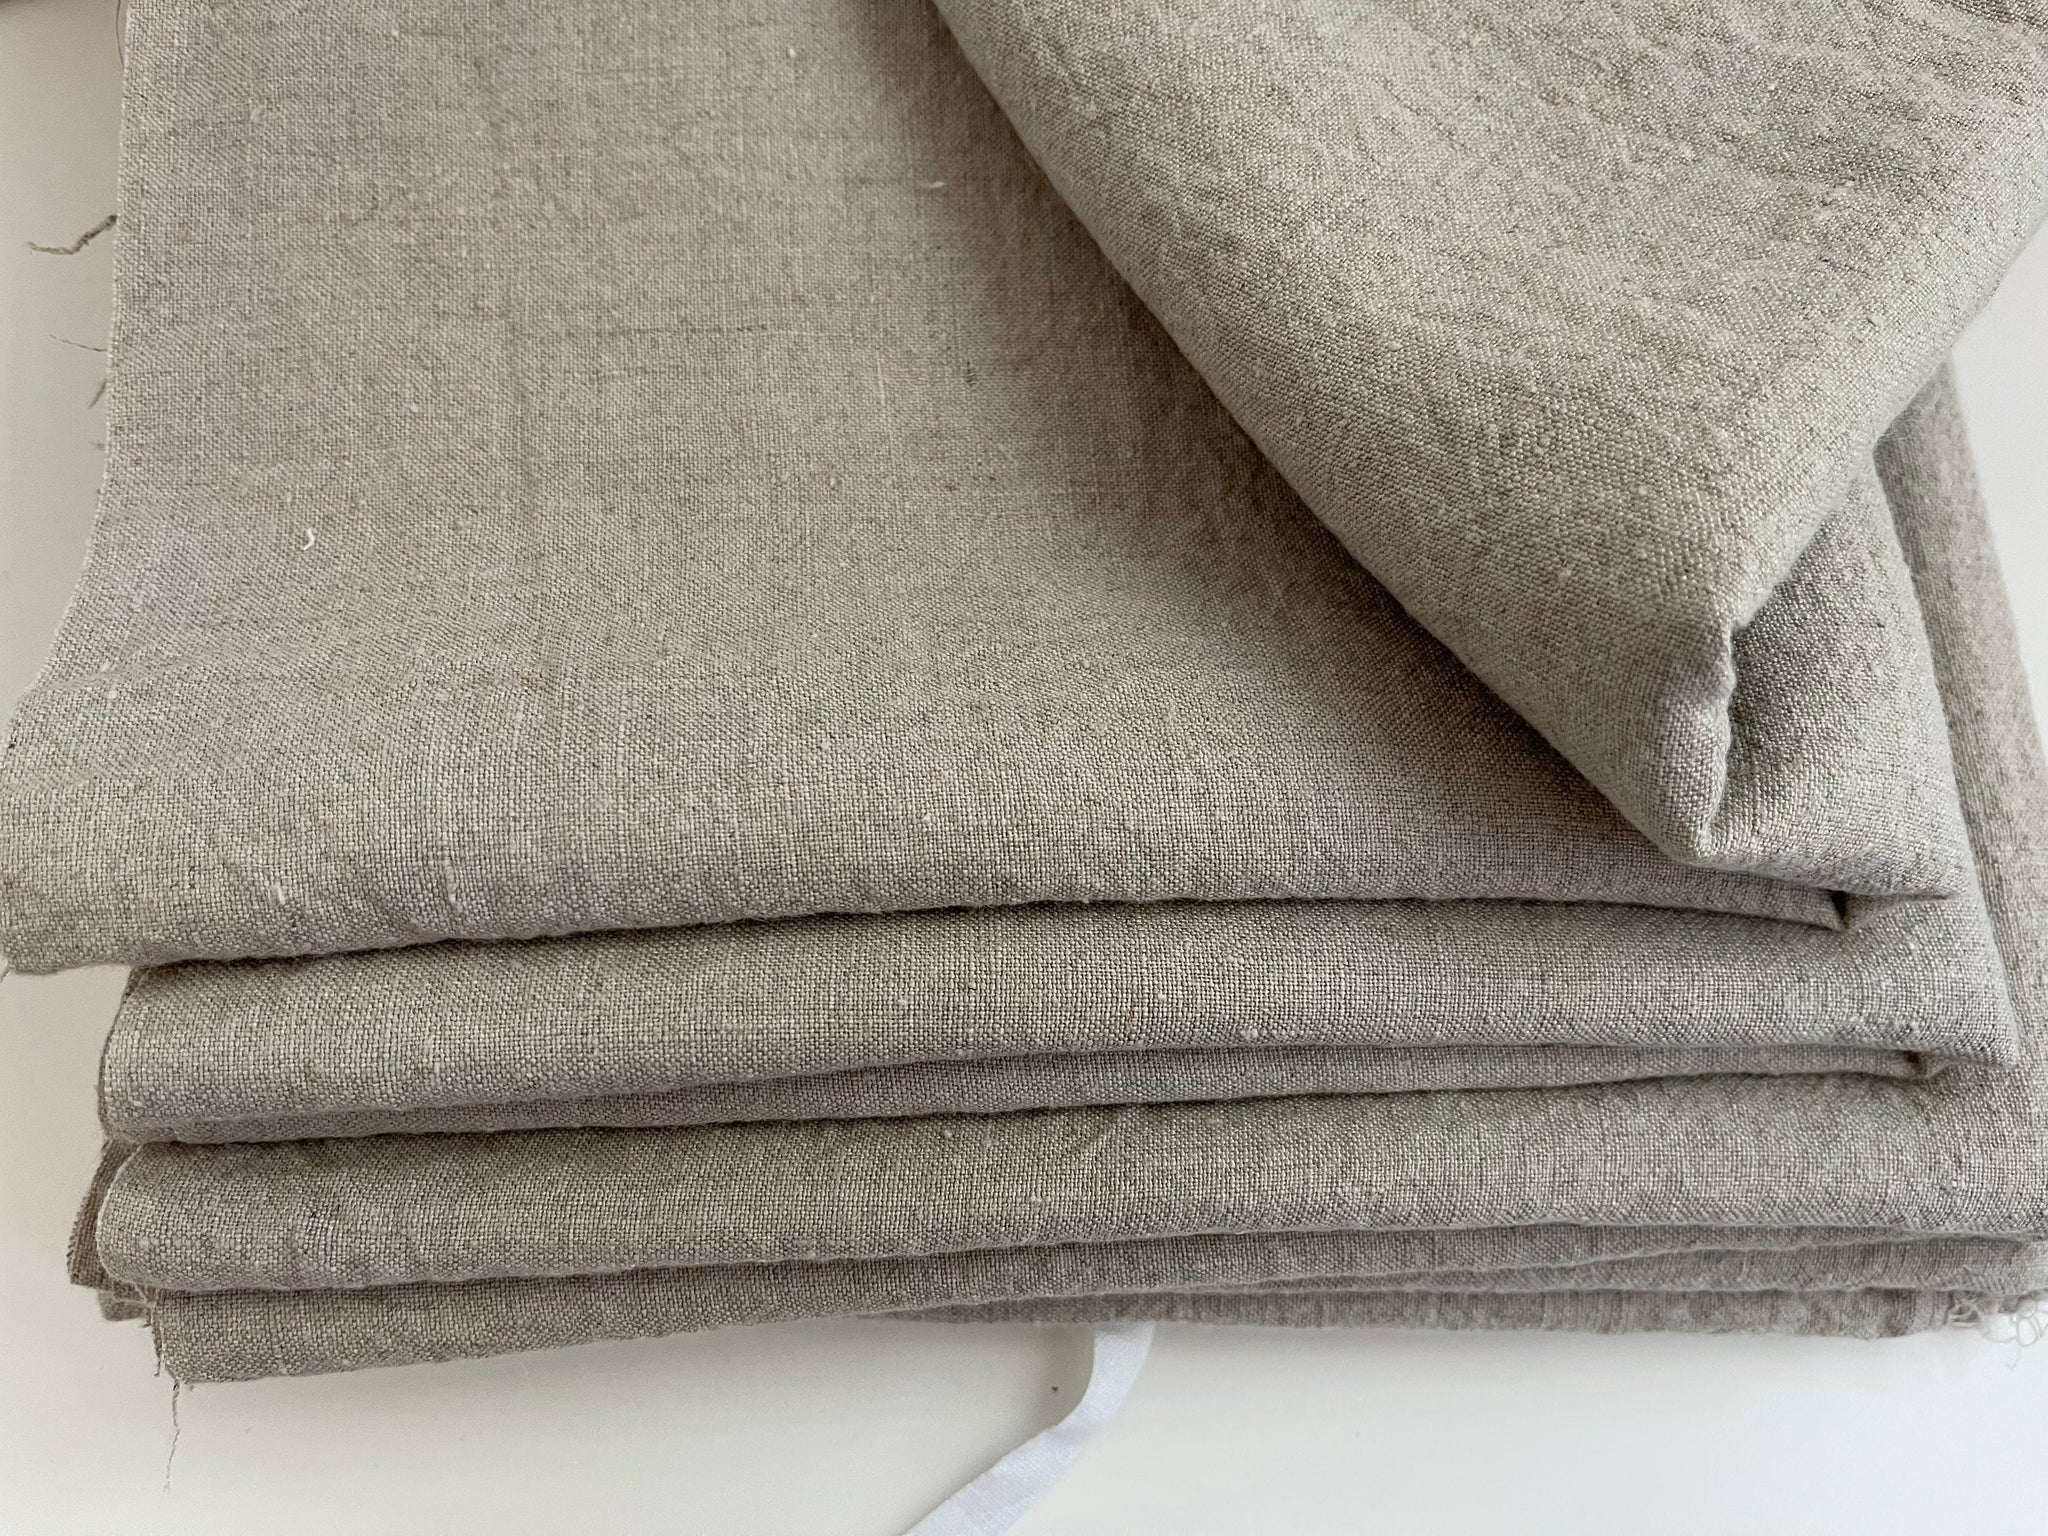 Linen Fabric Remnants - Natural Stone Washed - approx. 2 yards